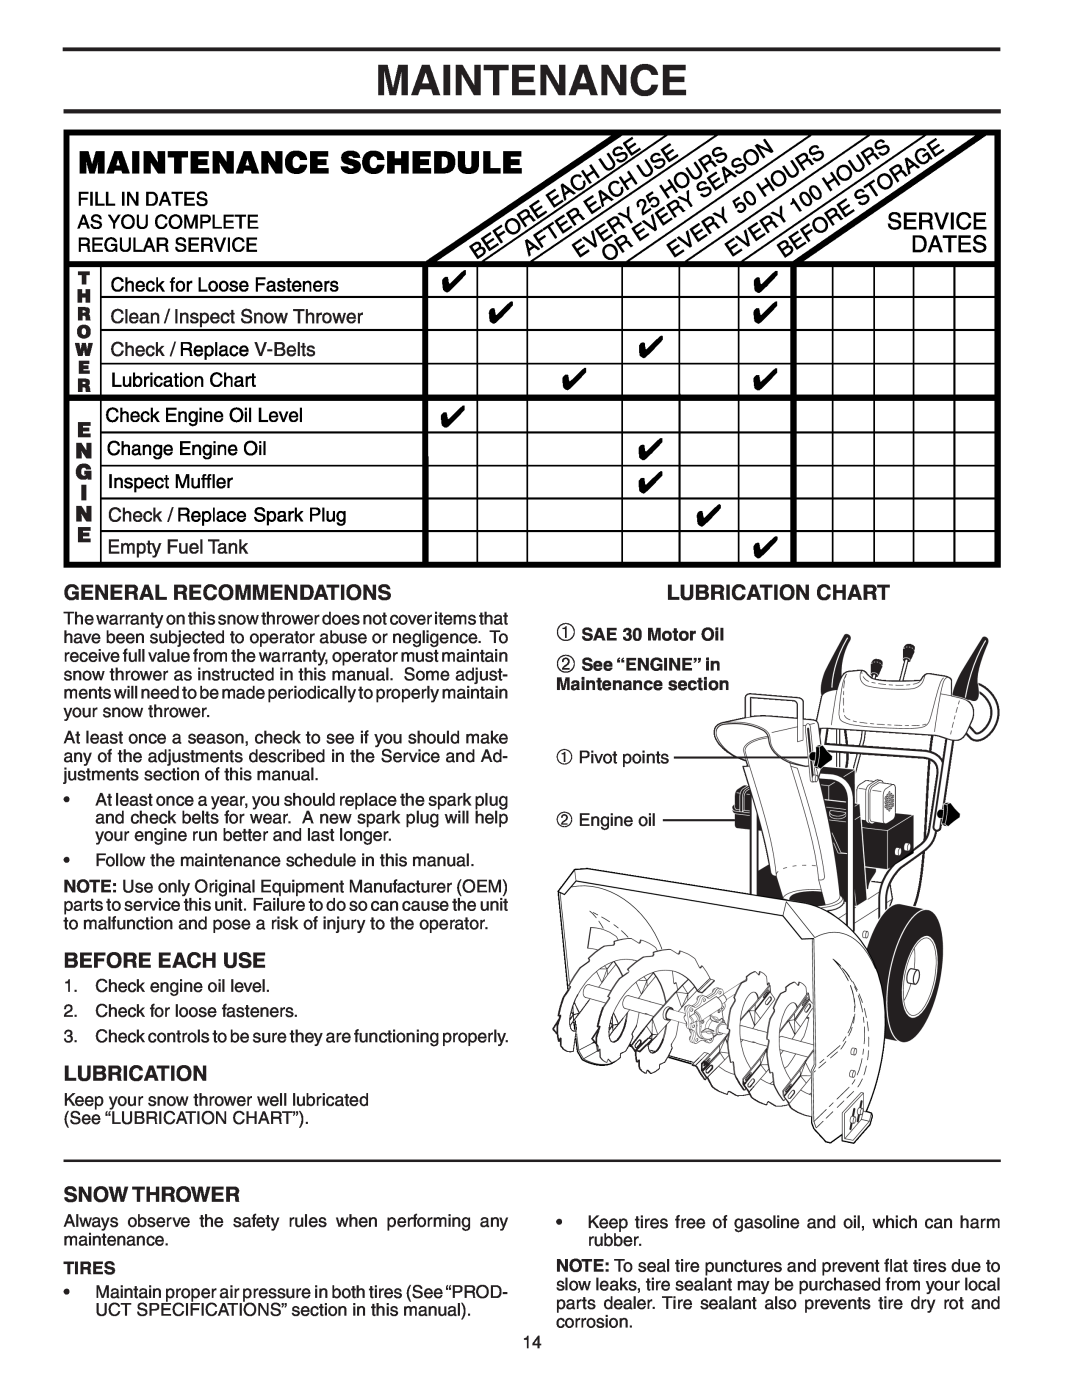 Poulan PP524A Maintenance, General Recommendations, Before Each Use, Snow Thrower, Lubrication Chart, Tires 